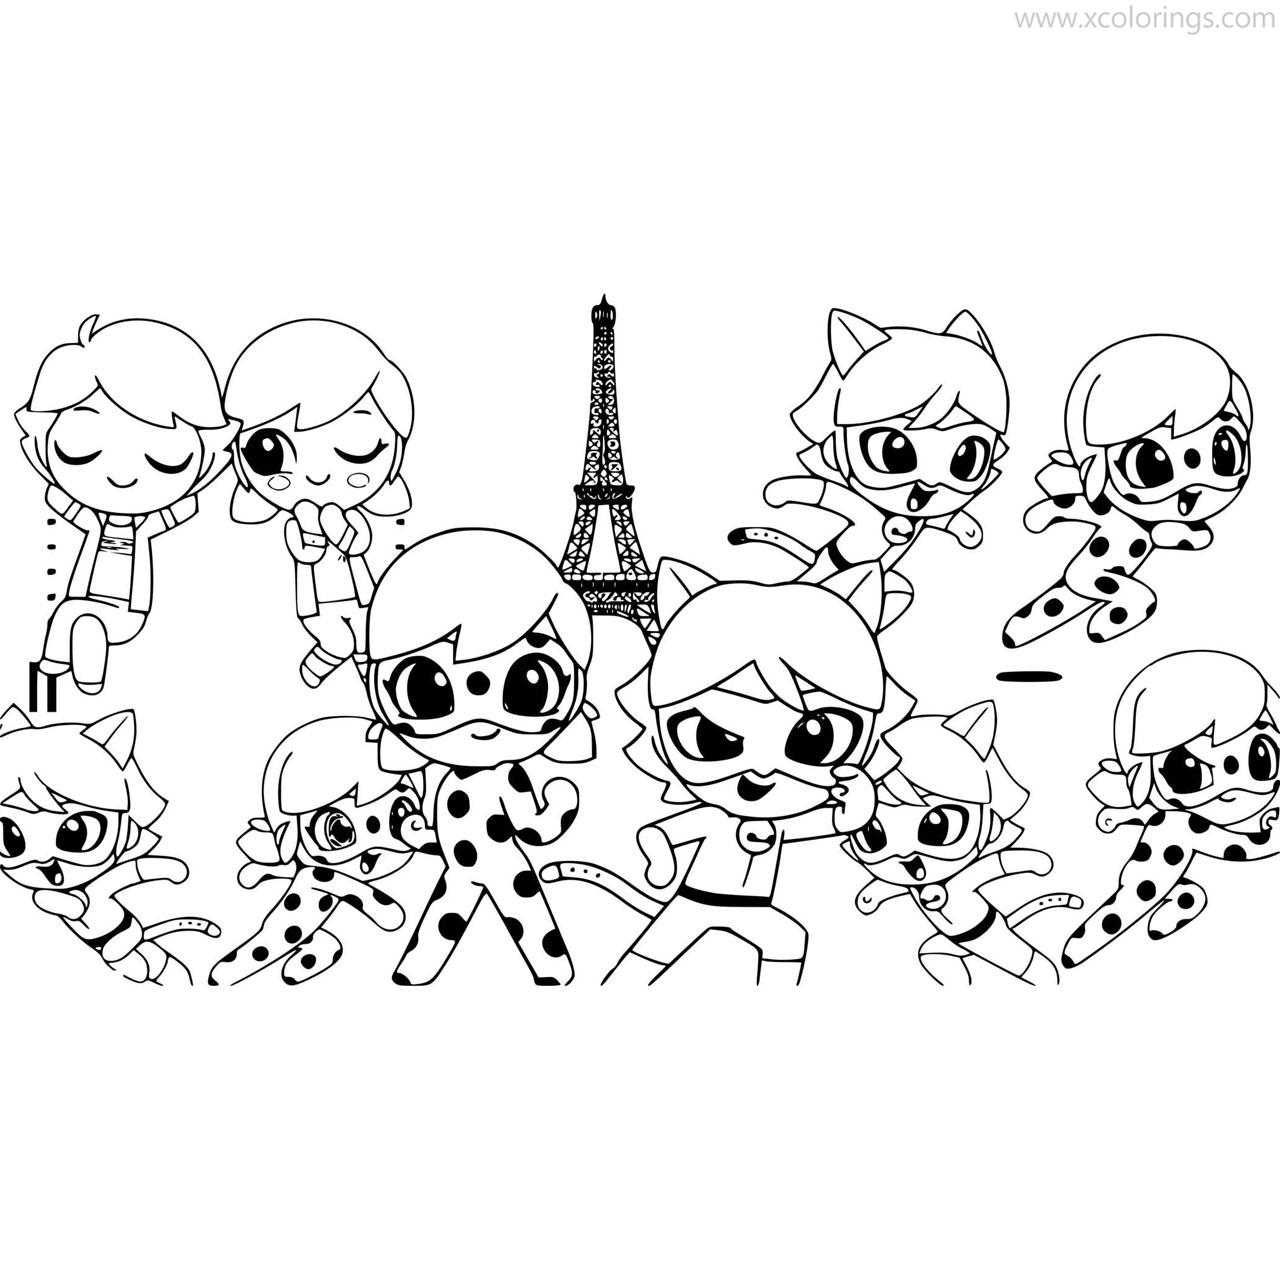 Chibi Miraculous Ladybug Coloring Pages XColorings com